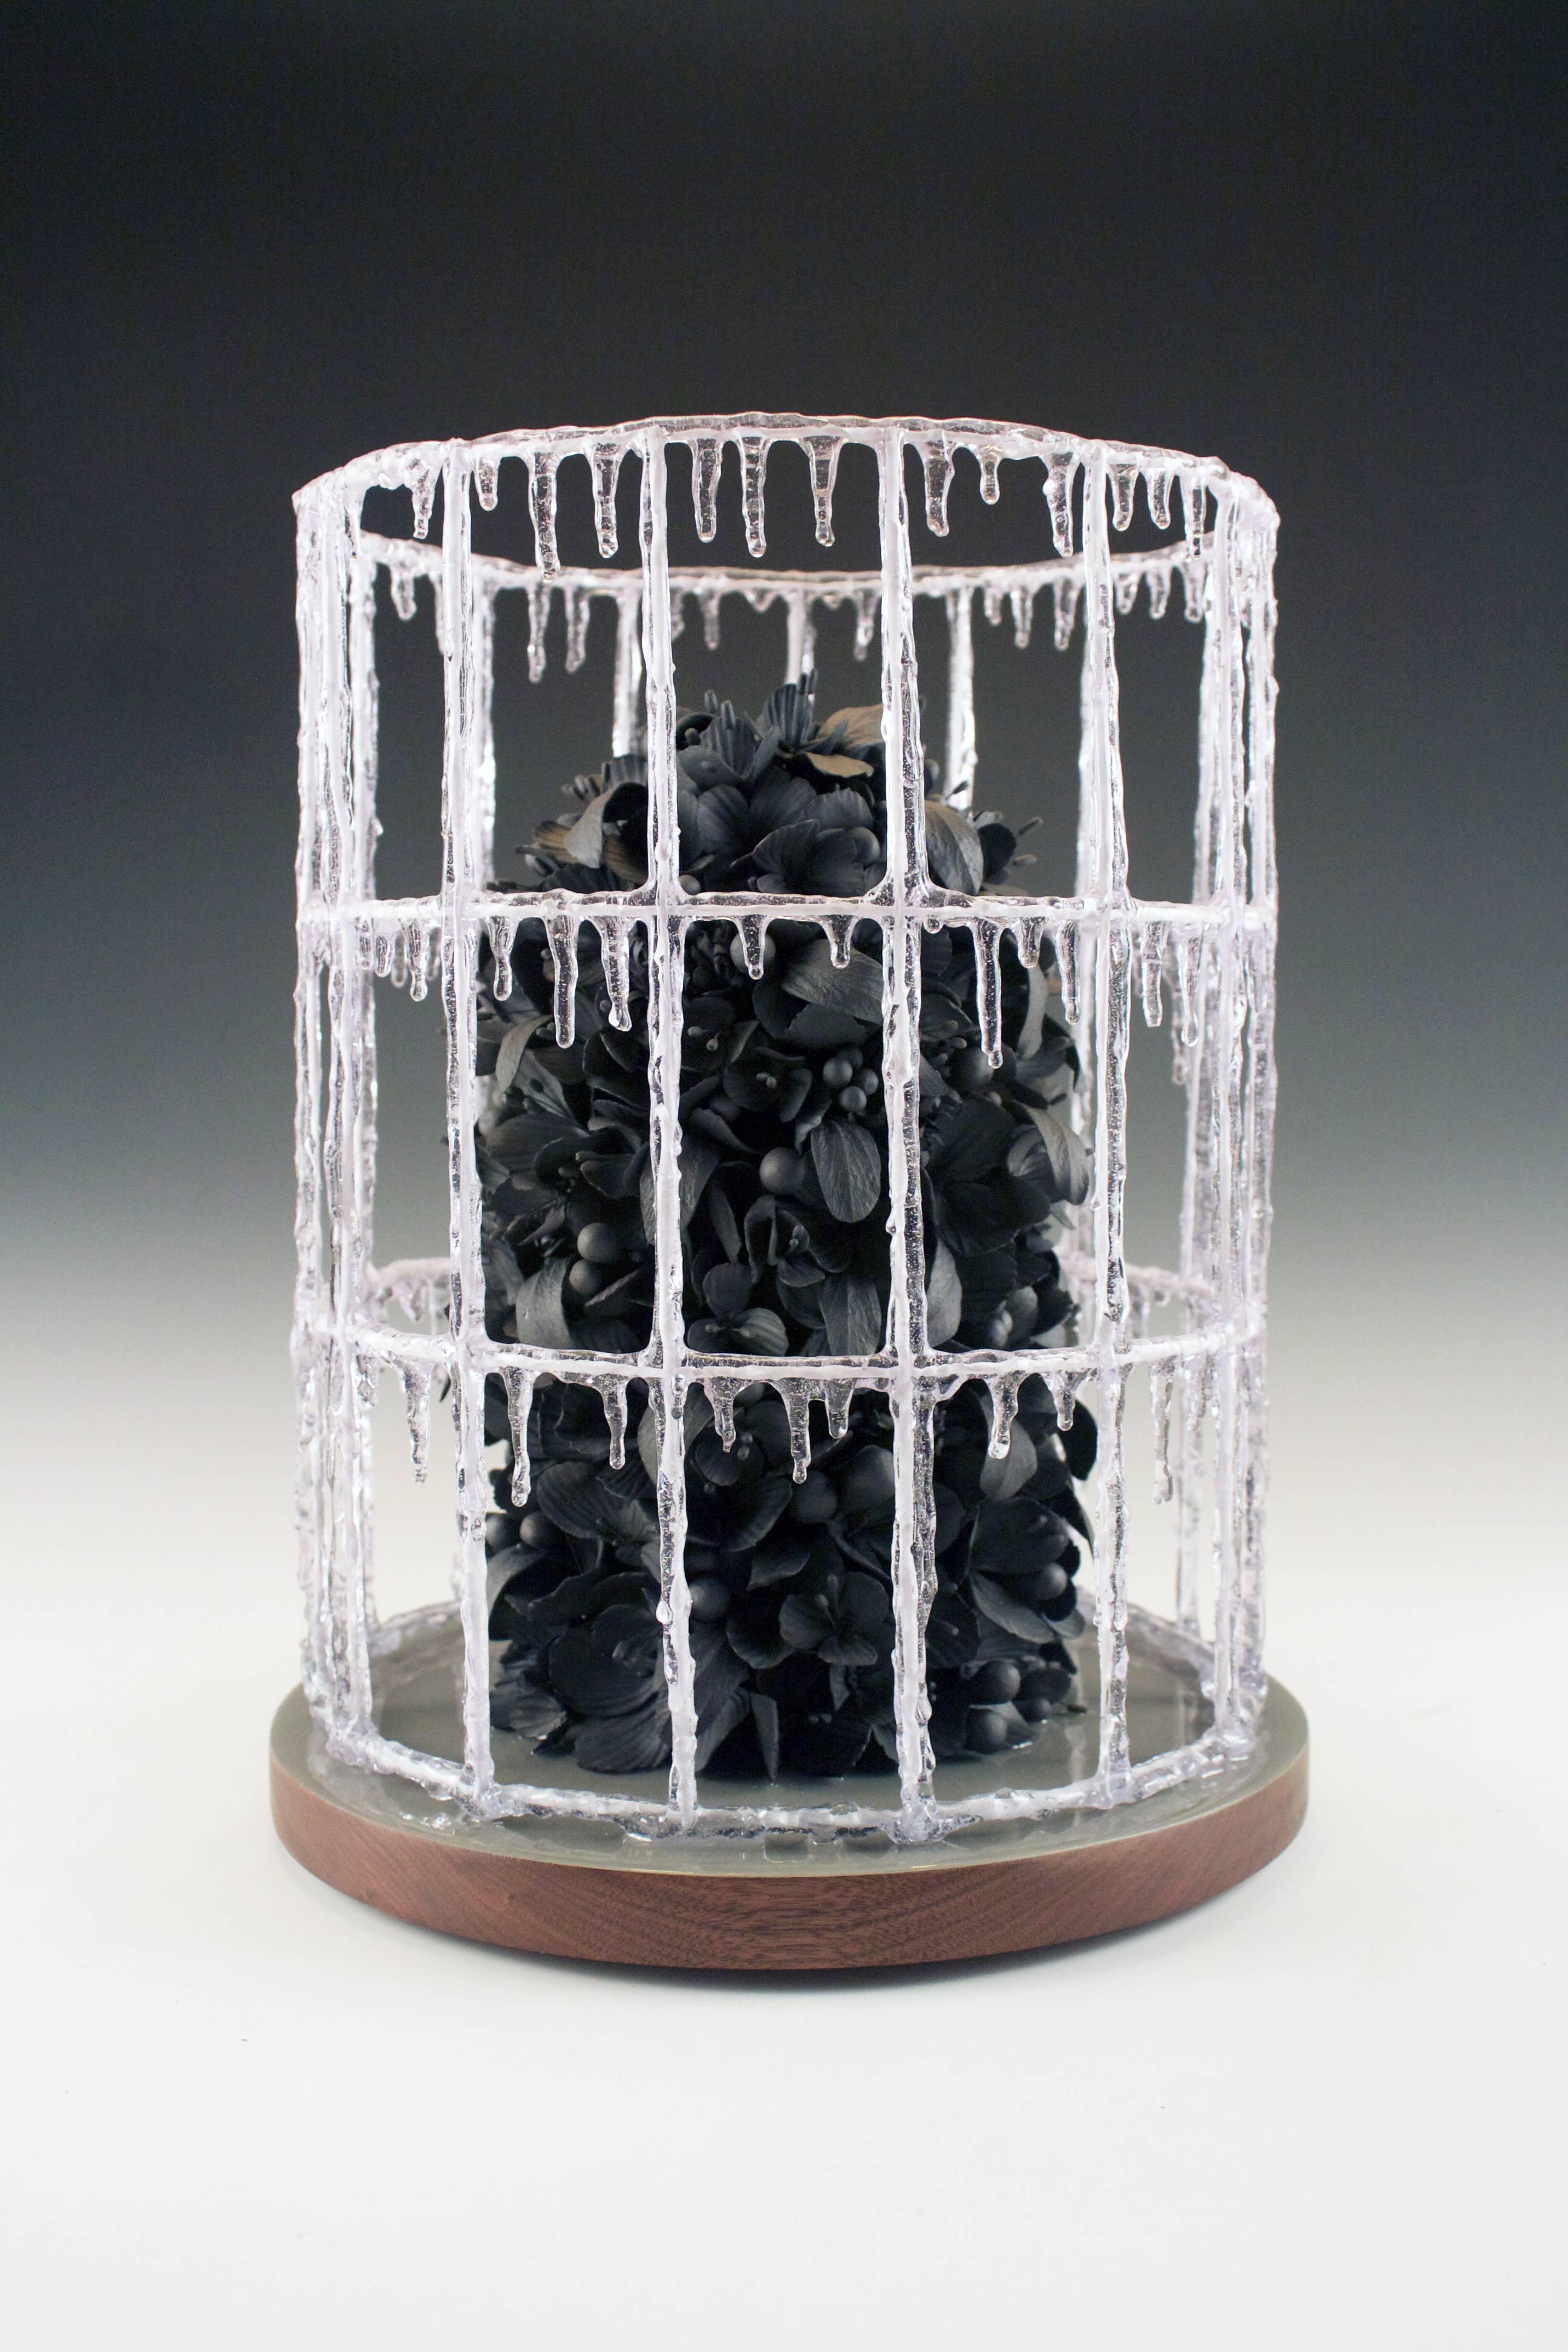 Noir Buisson by Rain Harris, Hand Sculpted Black Clay with Resin and Wood Base 4